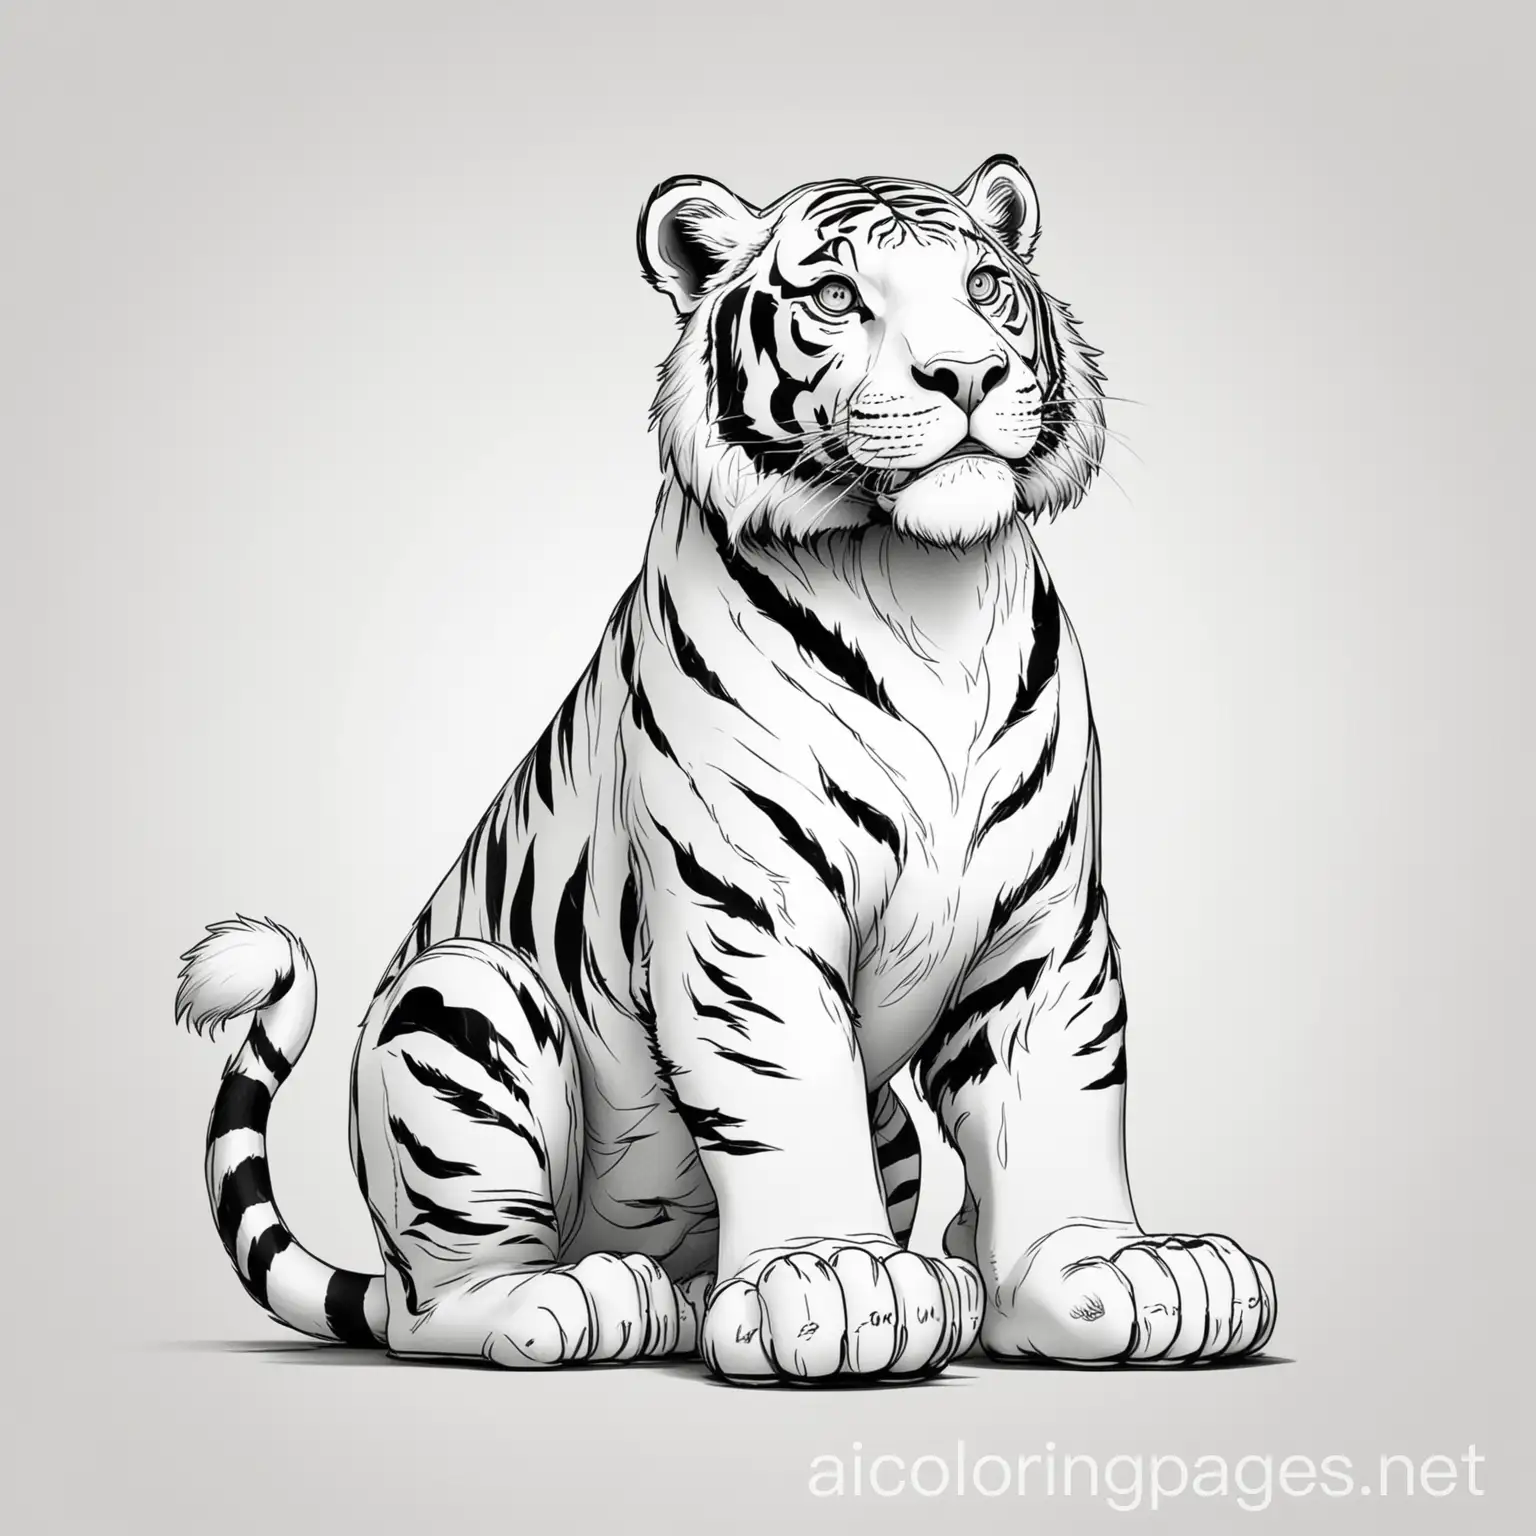 Big-Cartoon-Tiger-Coloring-Page-with-Simplicity-and-Ample-White-Space